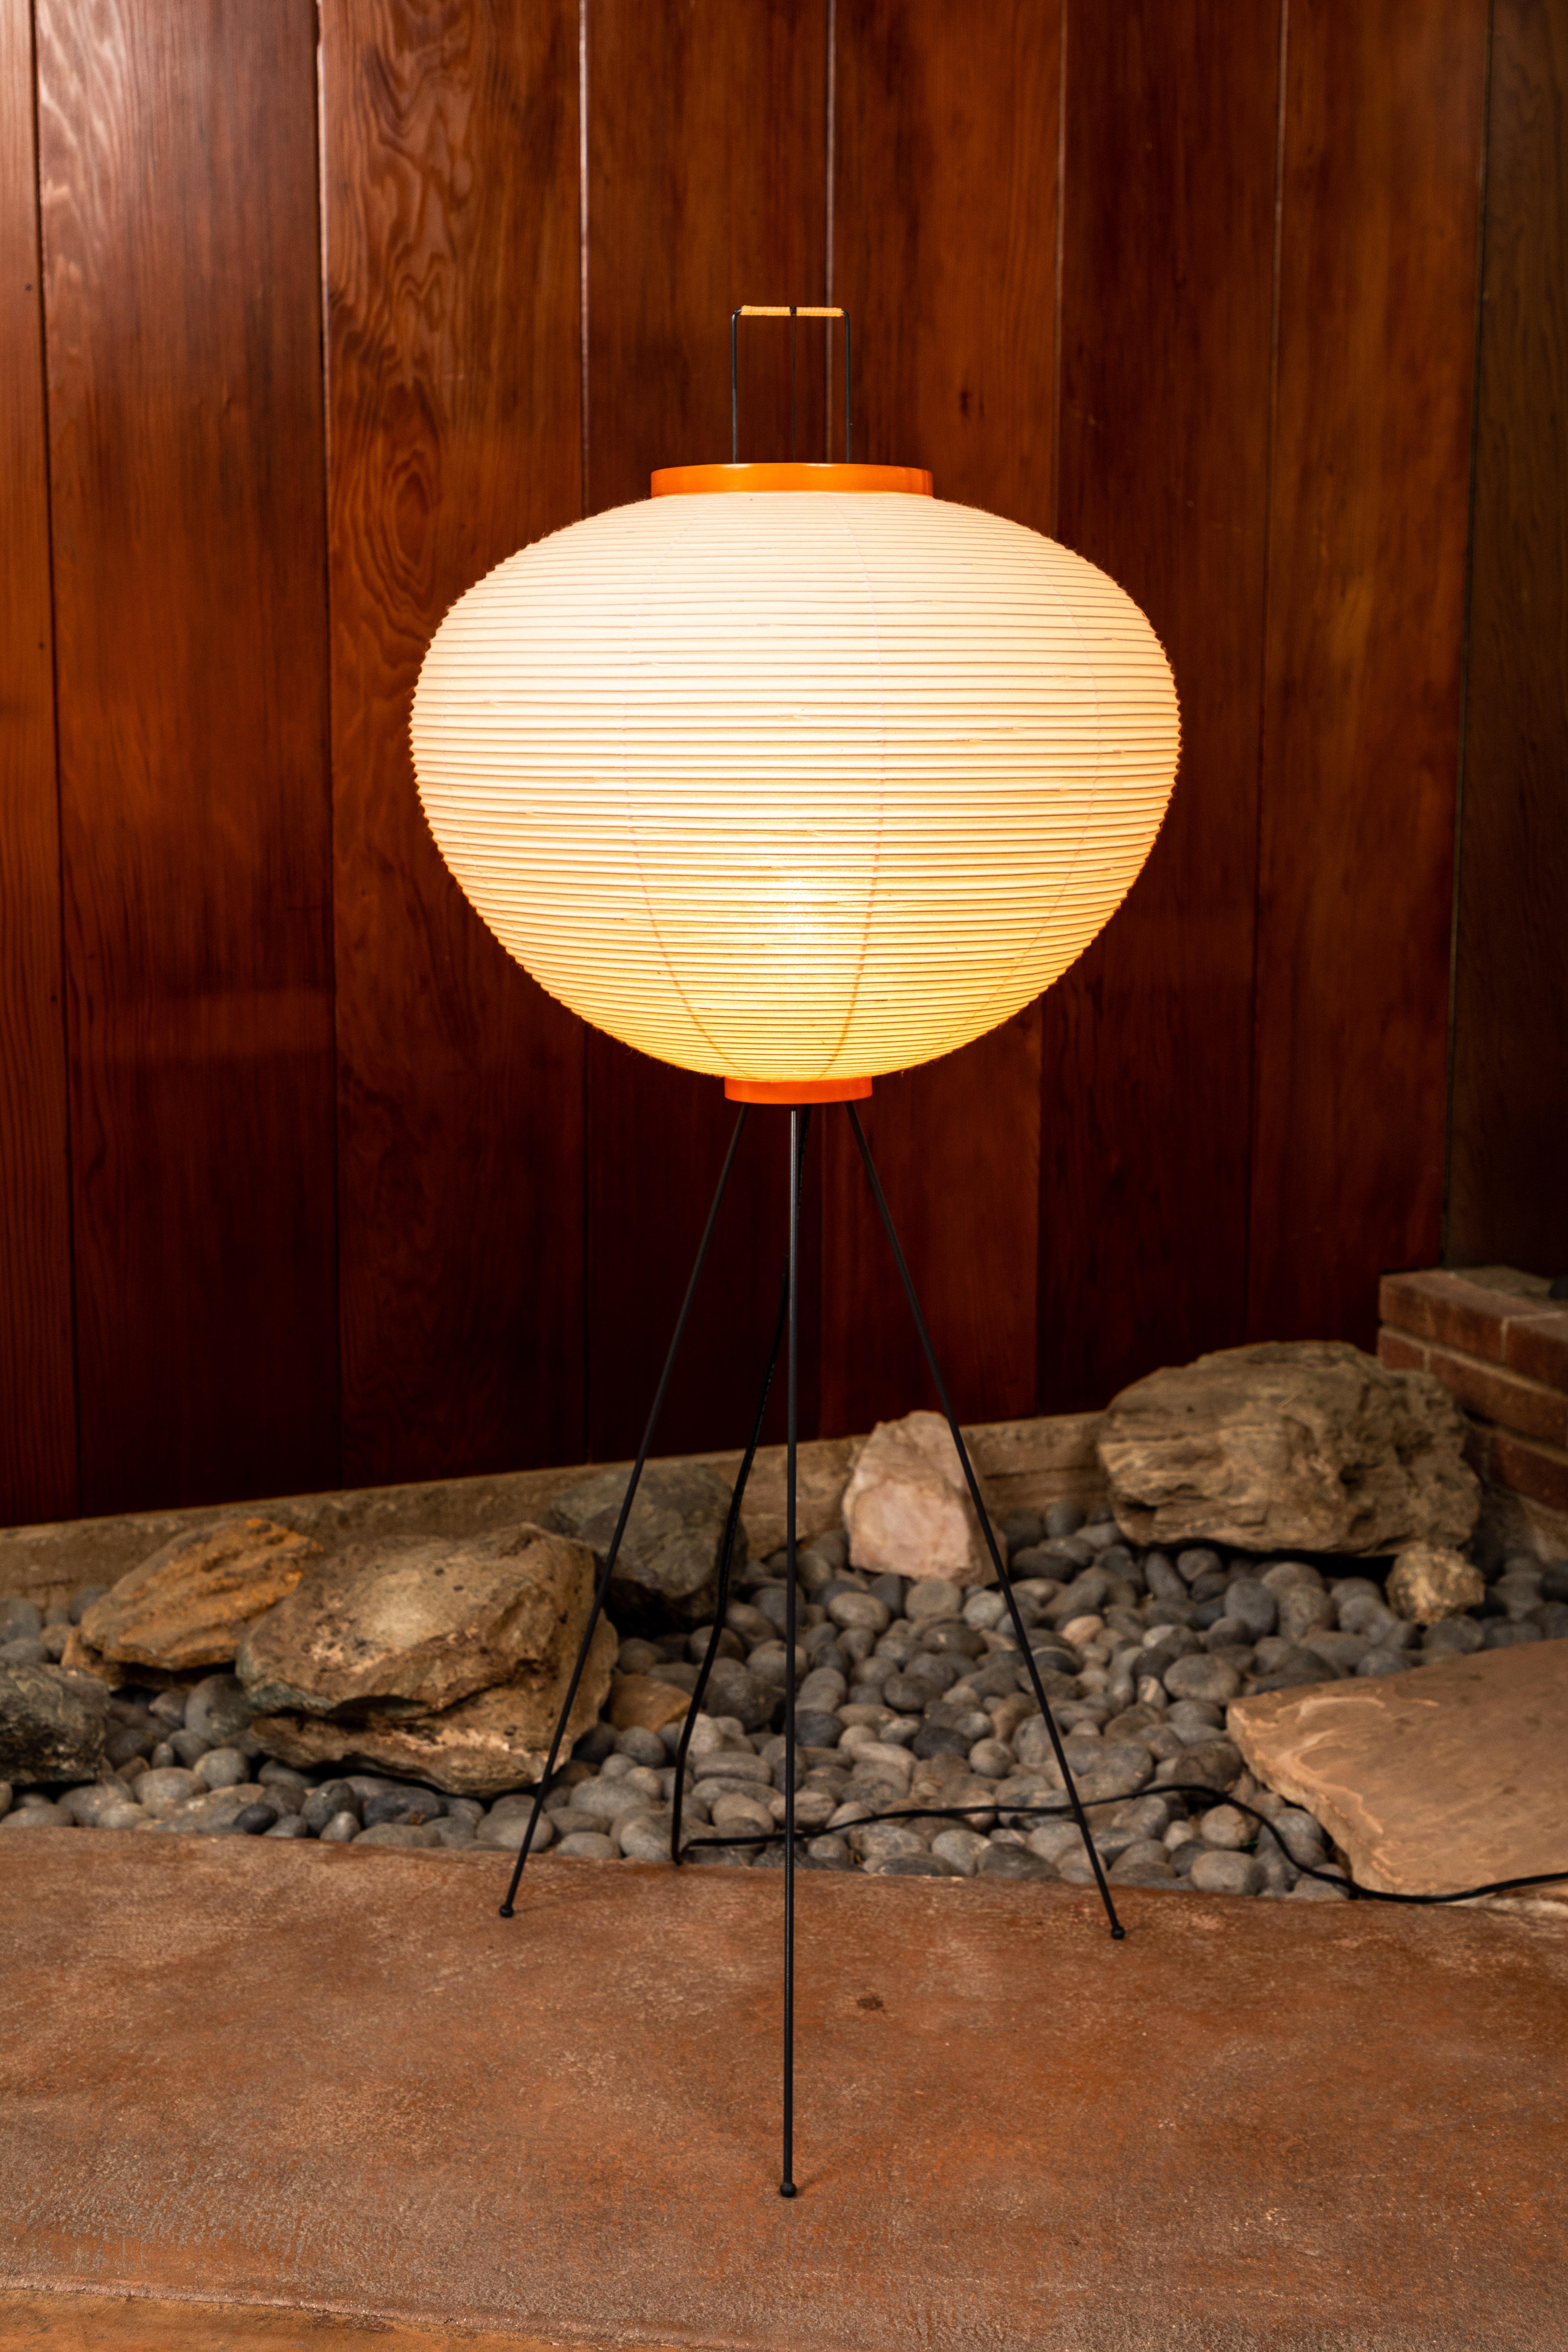 Isamu Noguchi Akari 10A floor lamp with signature. The shades are made from handmade washi paper and bamboo ribs with Noguchi Akari manufacturer's stamp. Akari light sculptures by Isamu Noguchi are considered icons of 1950s modern design. Designed